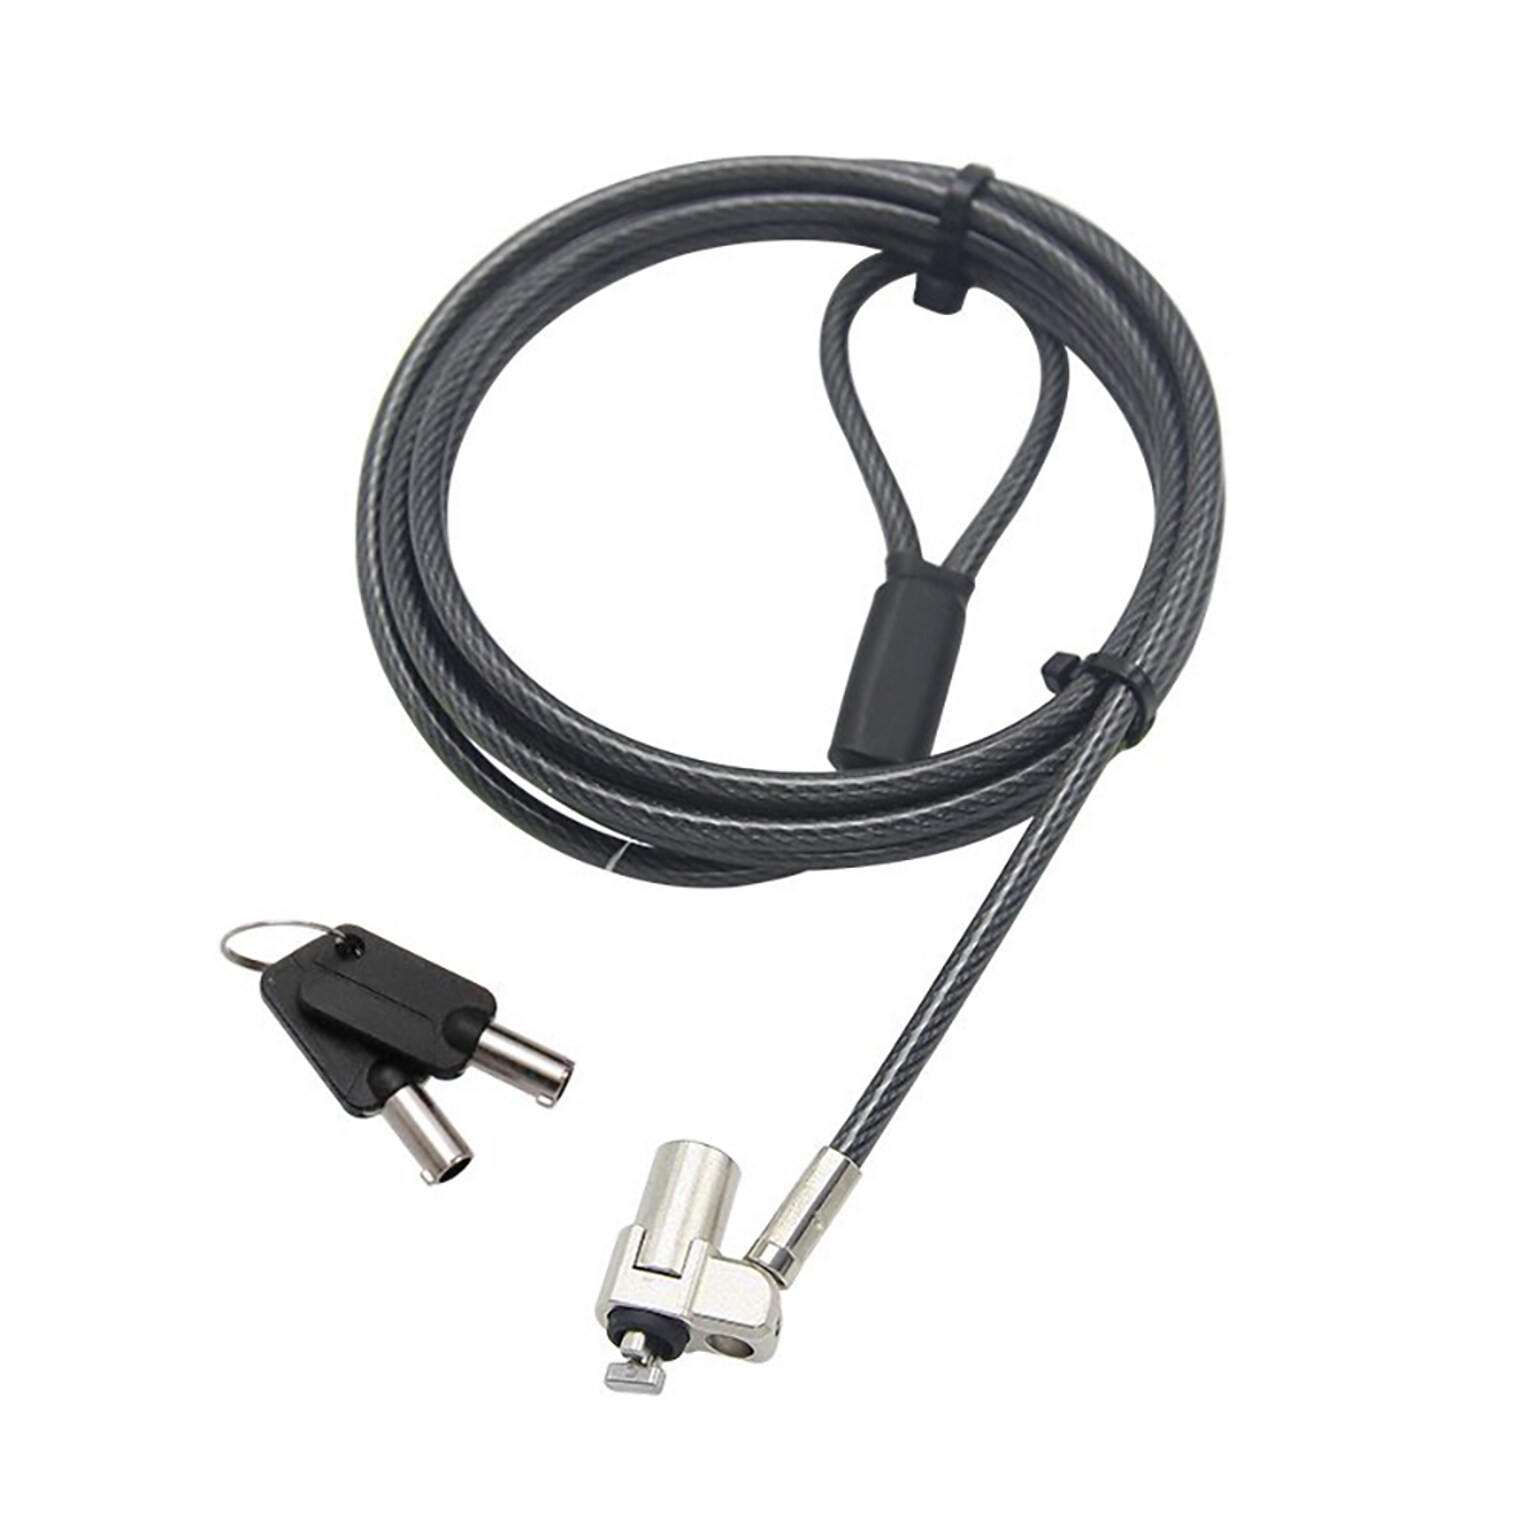 Mobile Edge Ultra-Slim Laptop Security Cable Lock, 6.5 (MEAKL1)